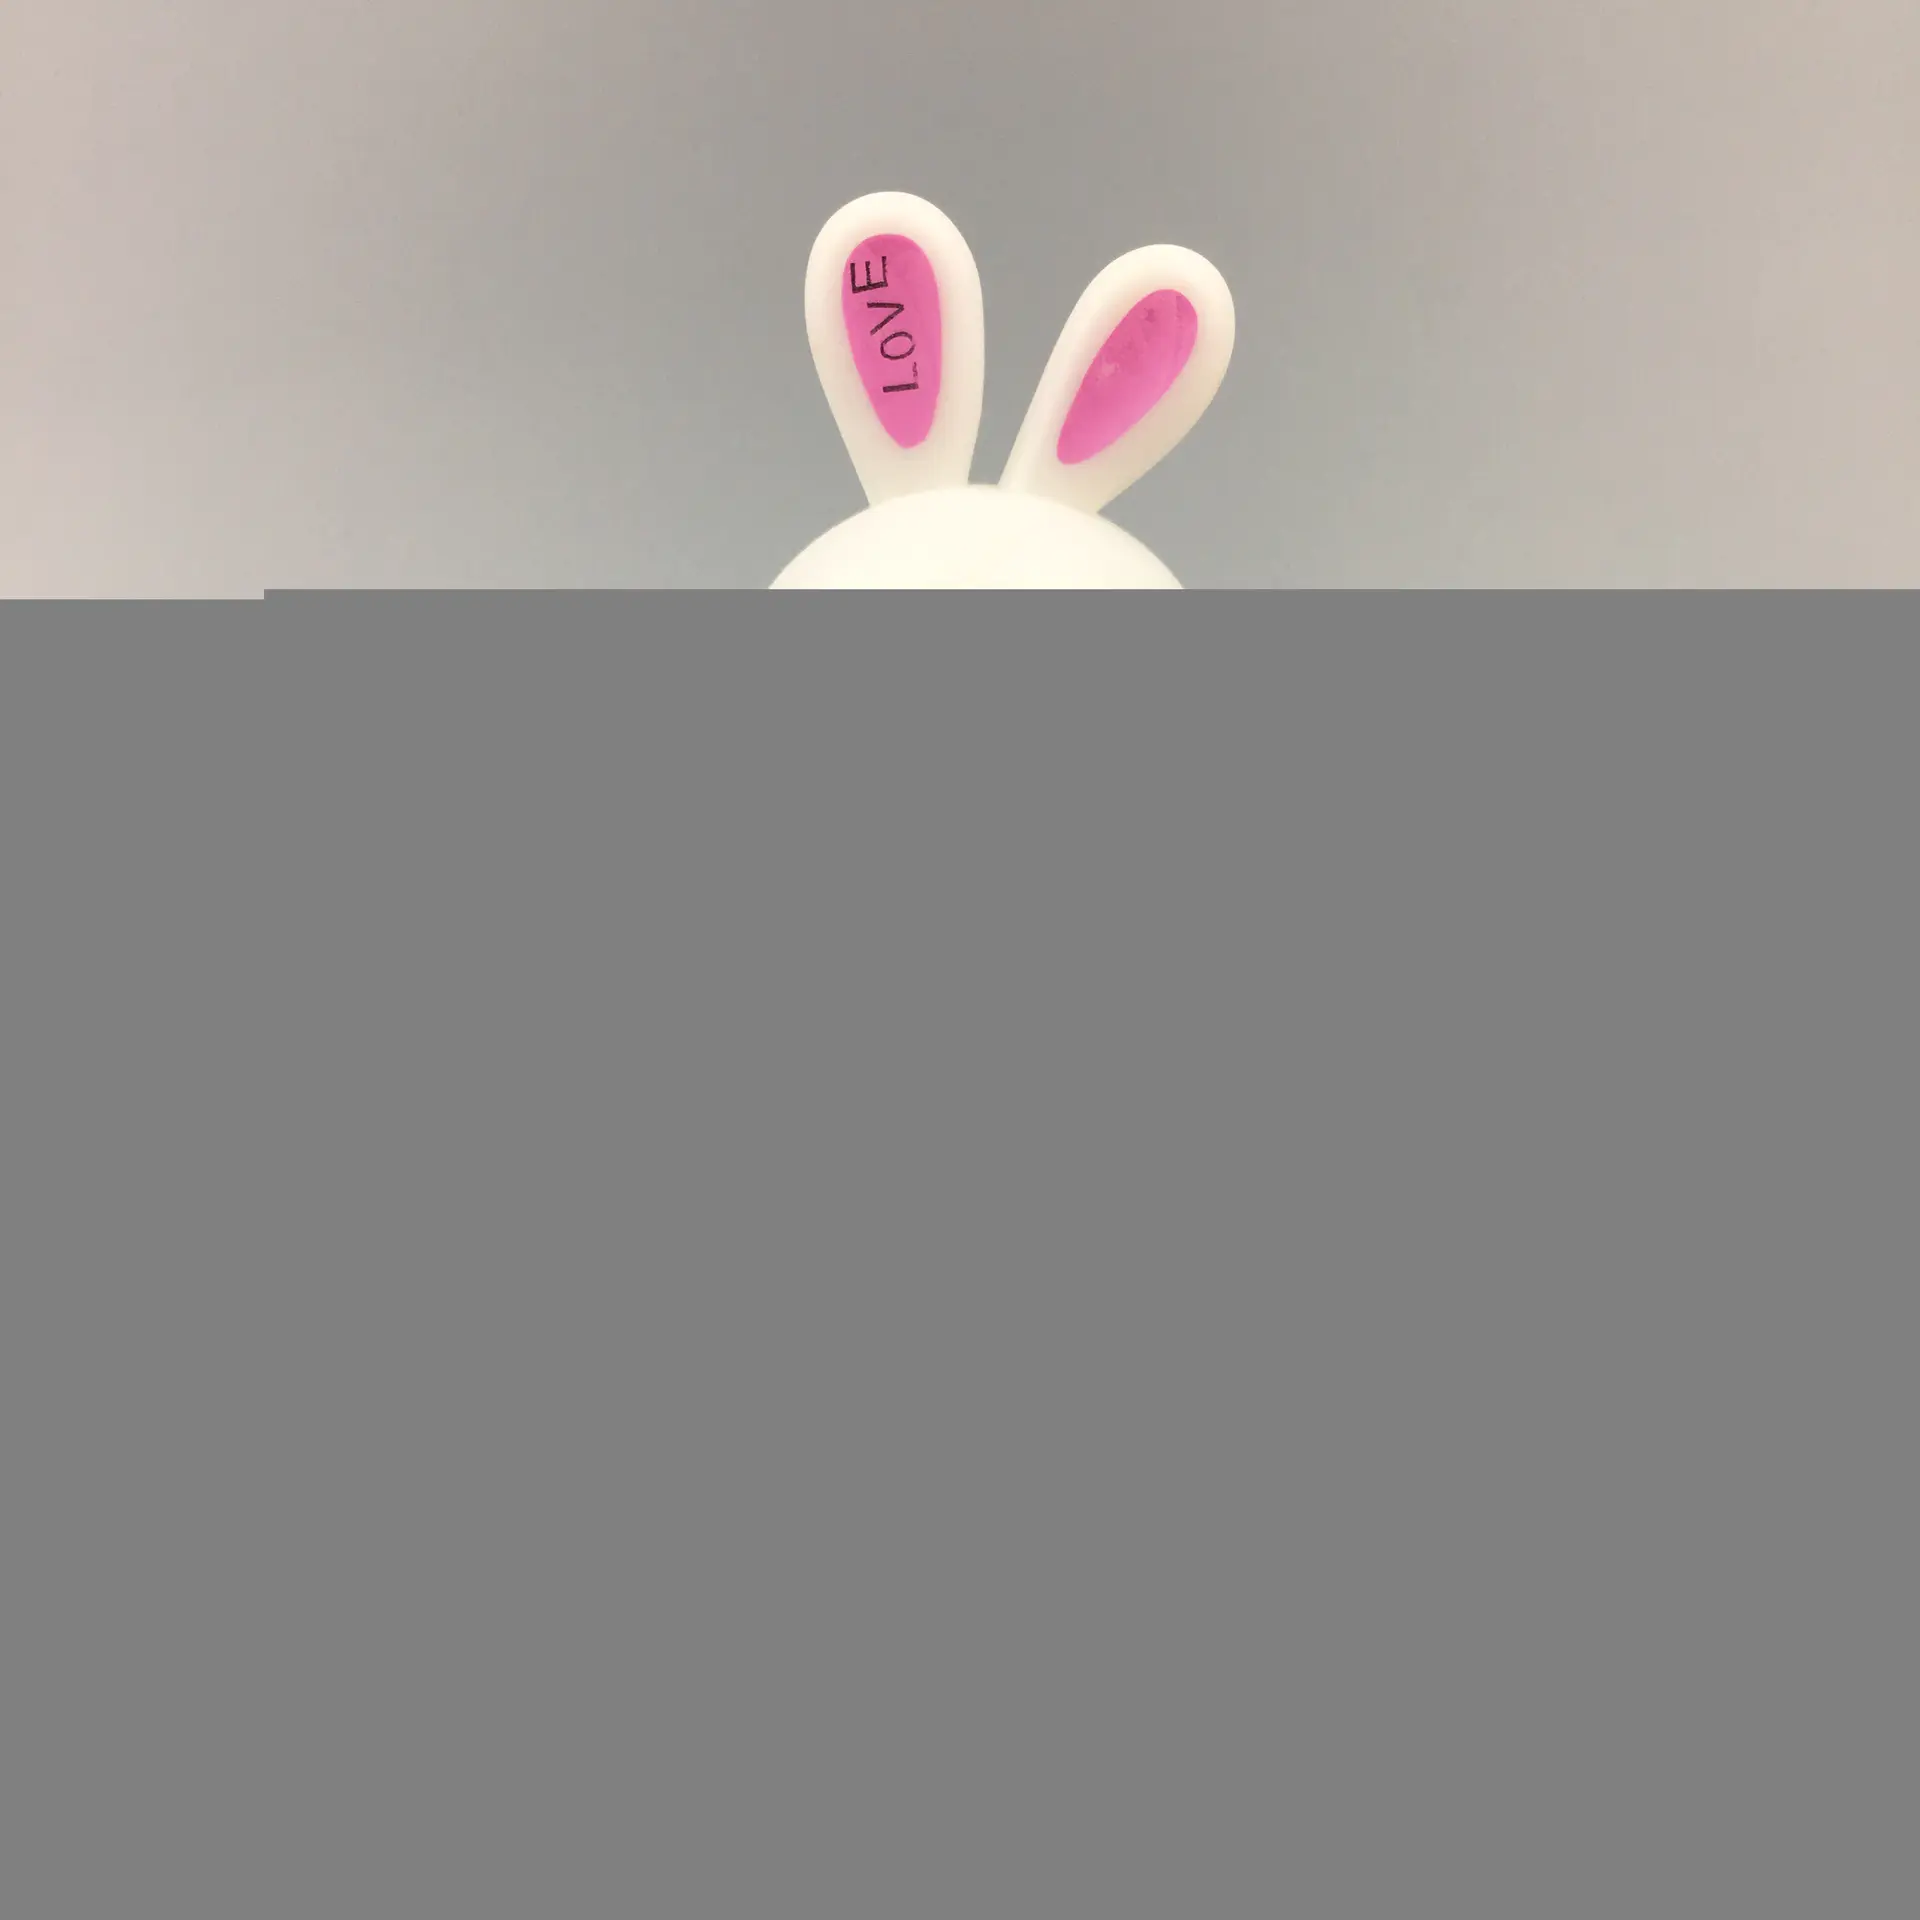 W104 US mini dressed long-eared rabbit switch plug in led night light For Baby Bedroom